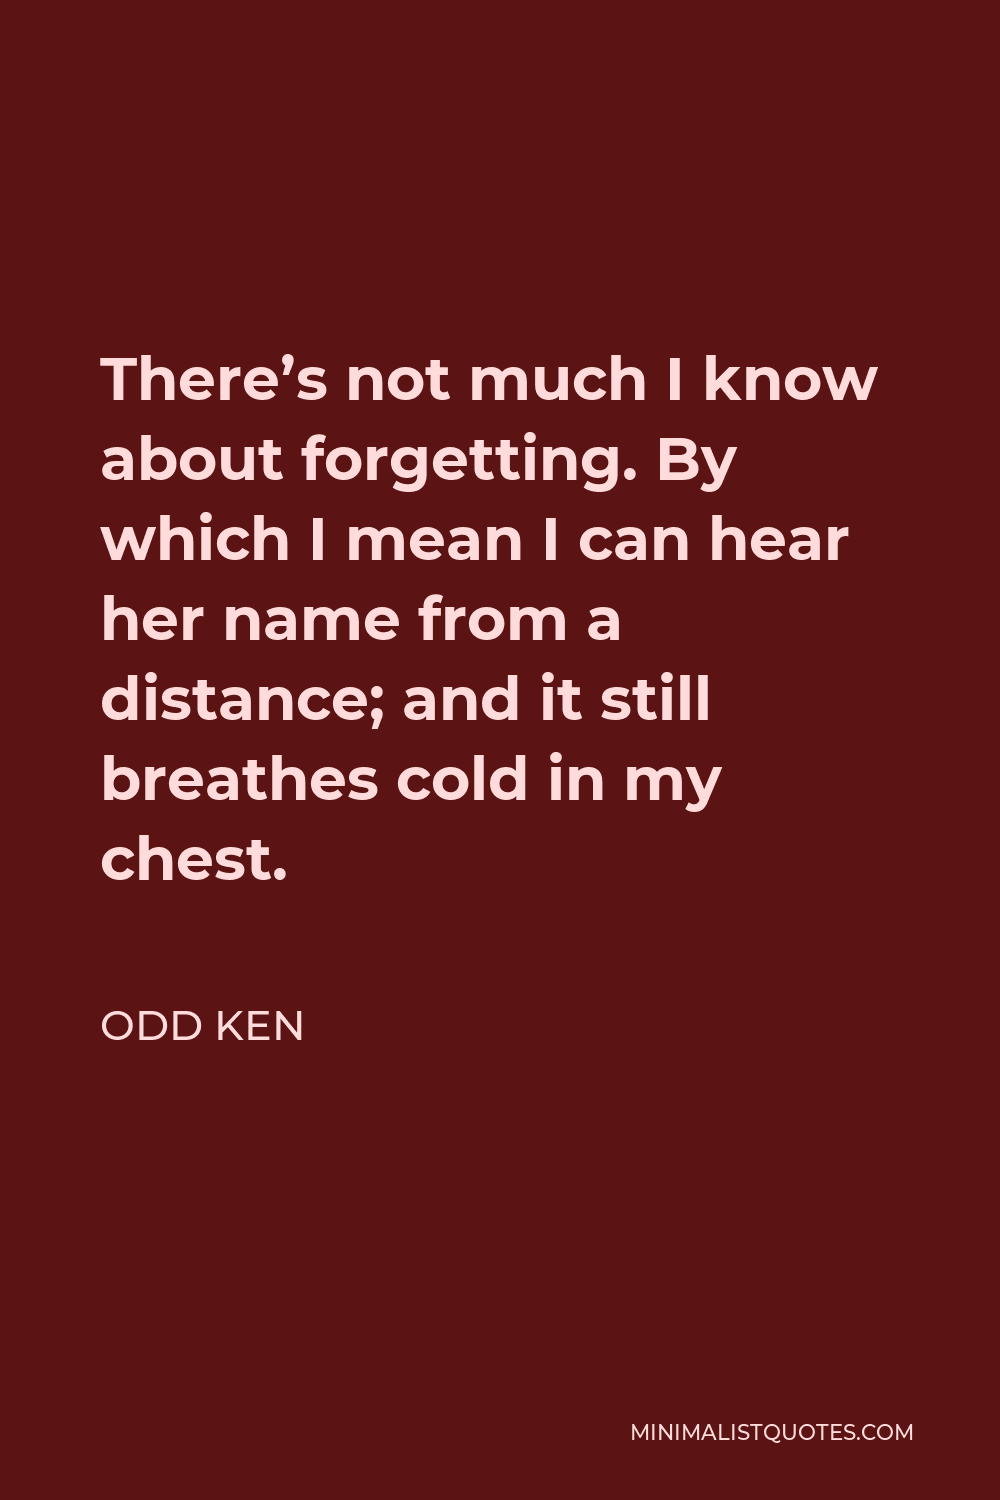 Odd Ken Quote - There’s not much I know about forgetting. By which I mean I can hear her name from a distance; and it still breathes cold in my chest.